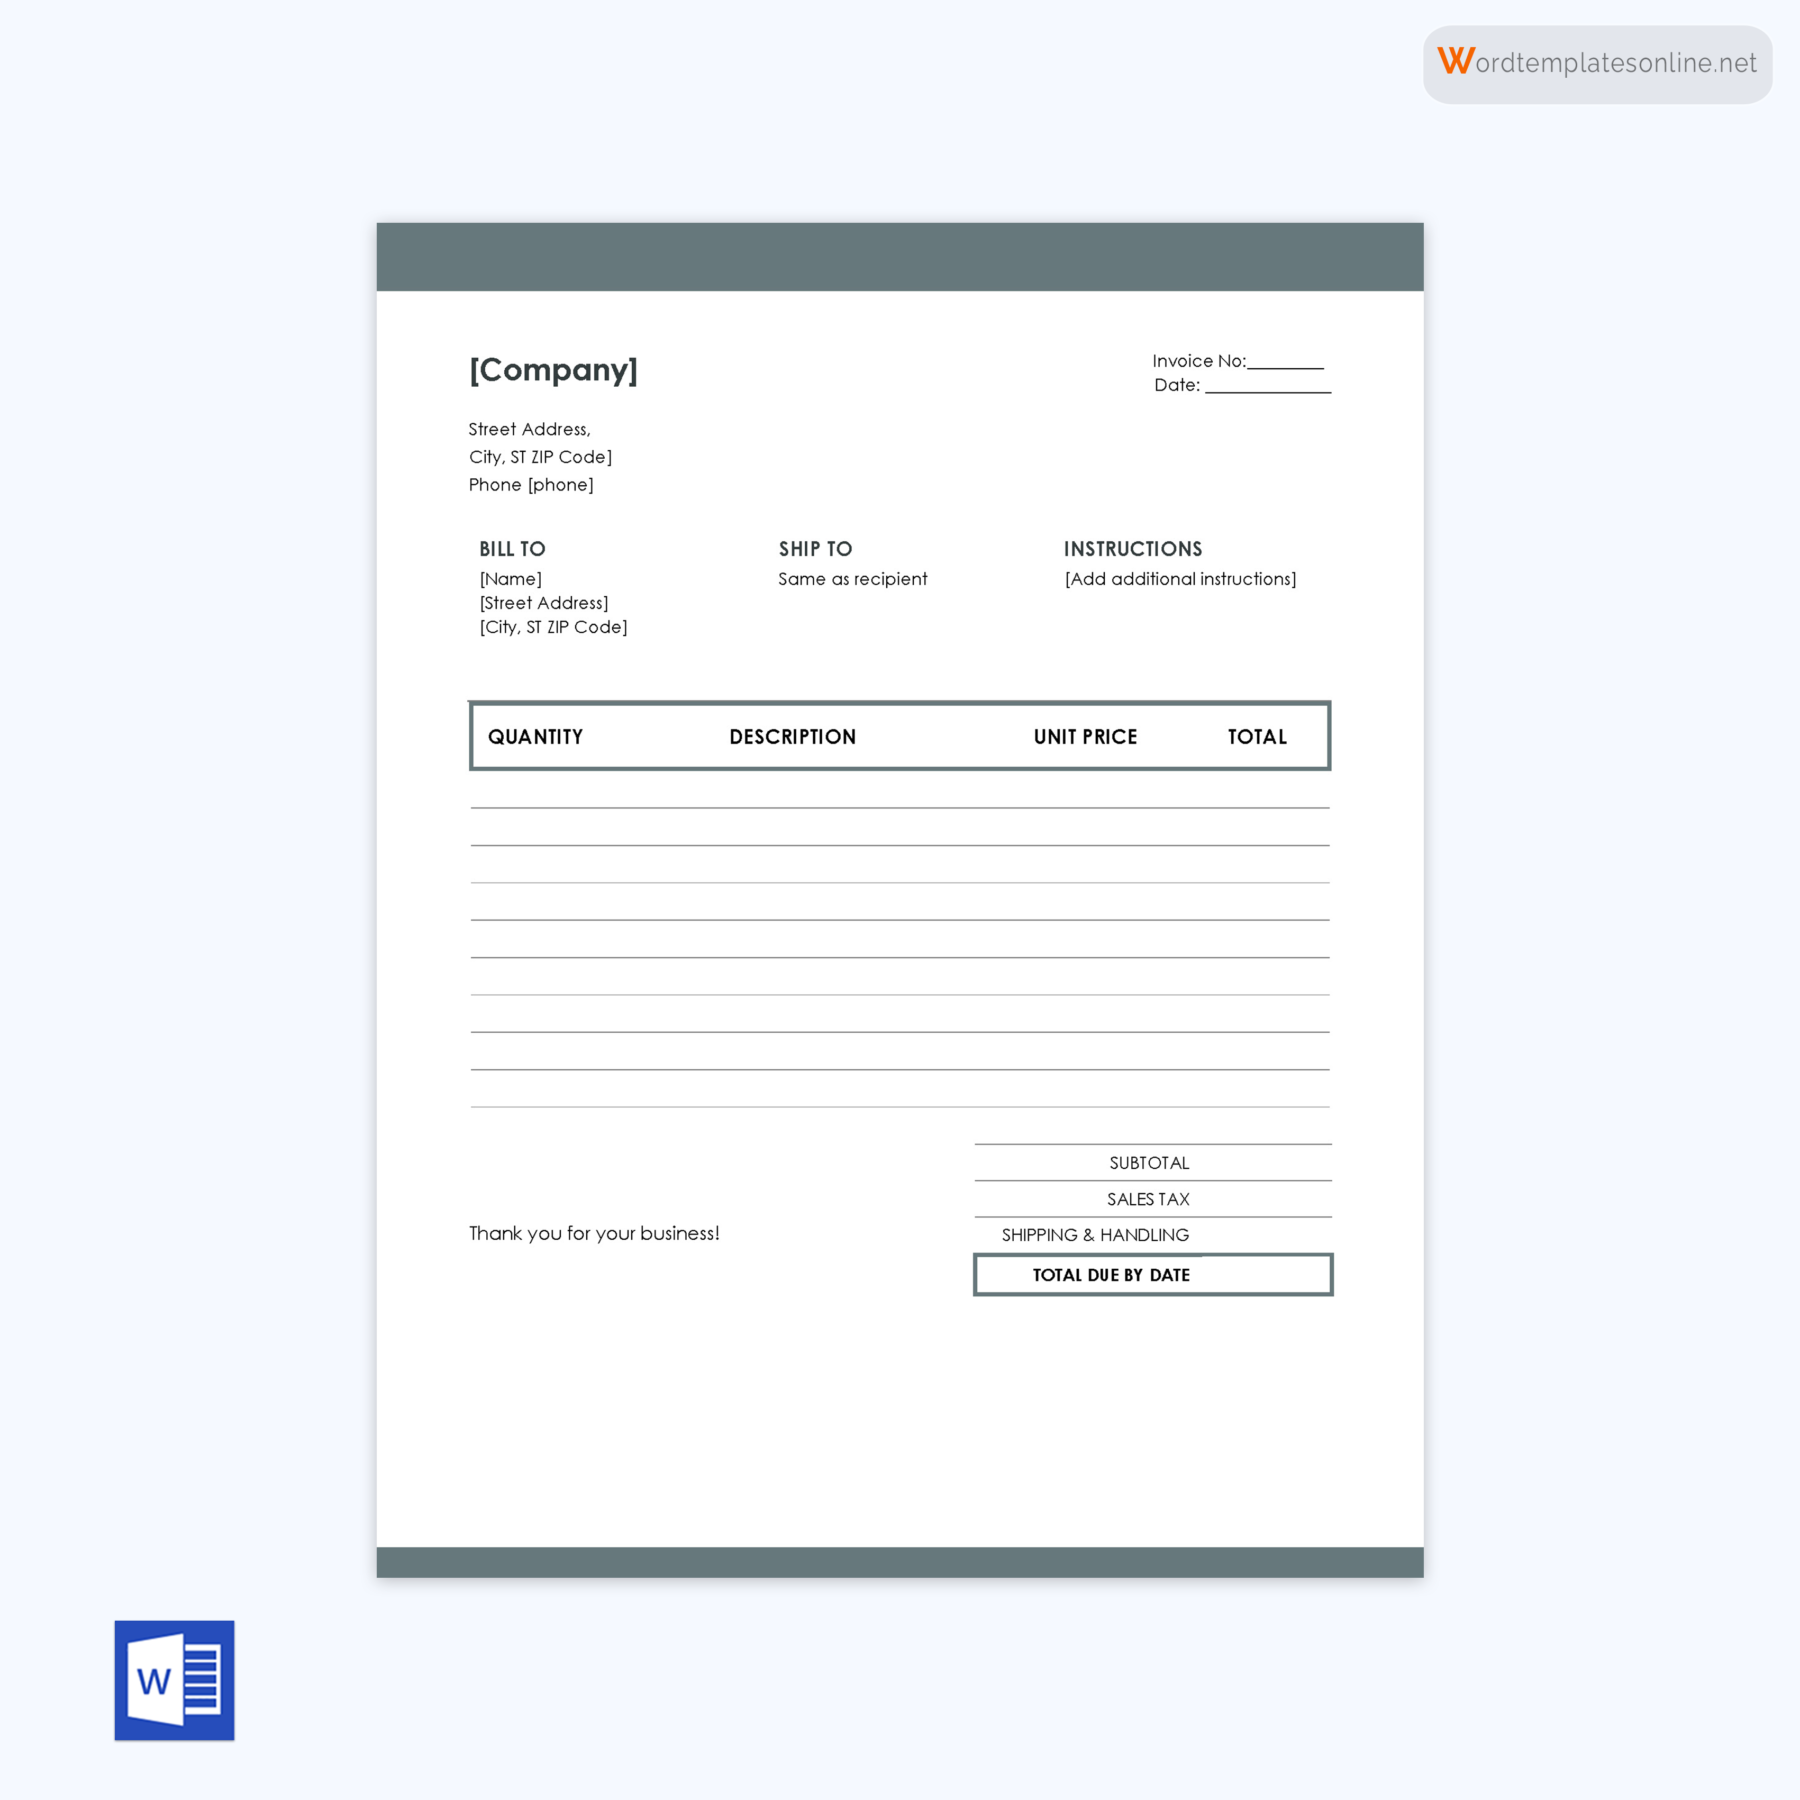 Free invoice template example - Fillable